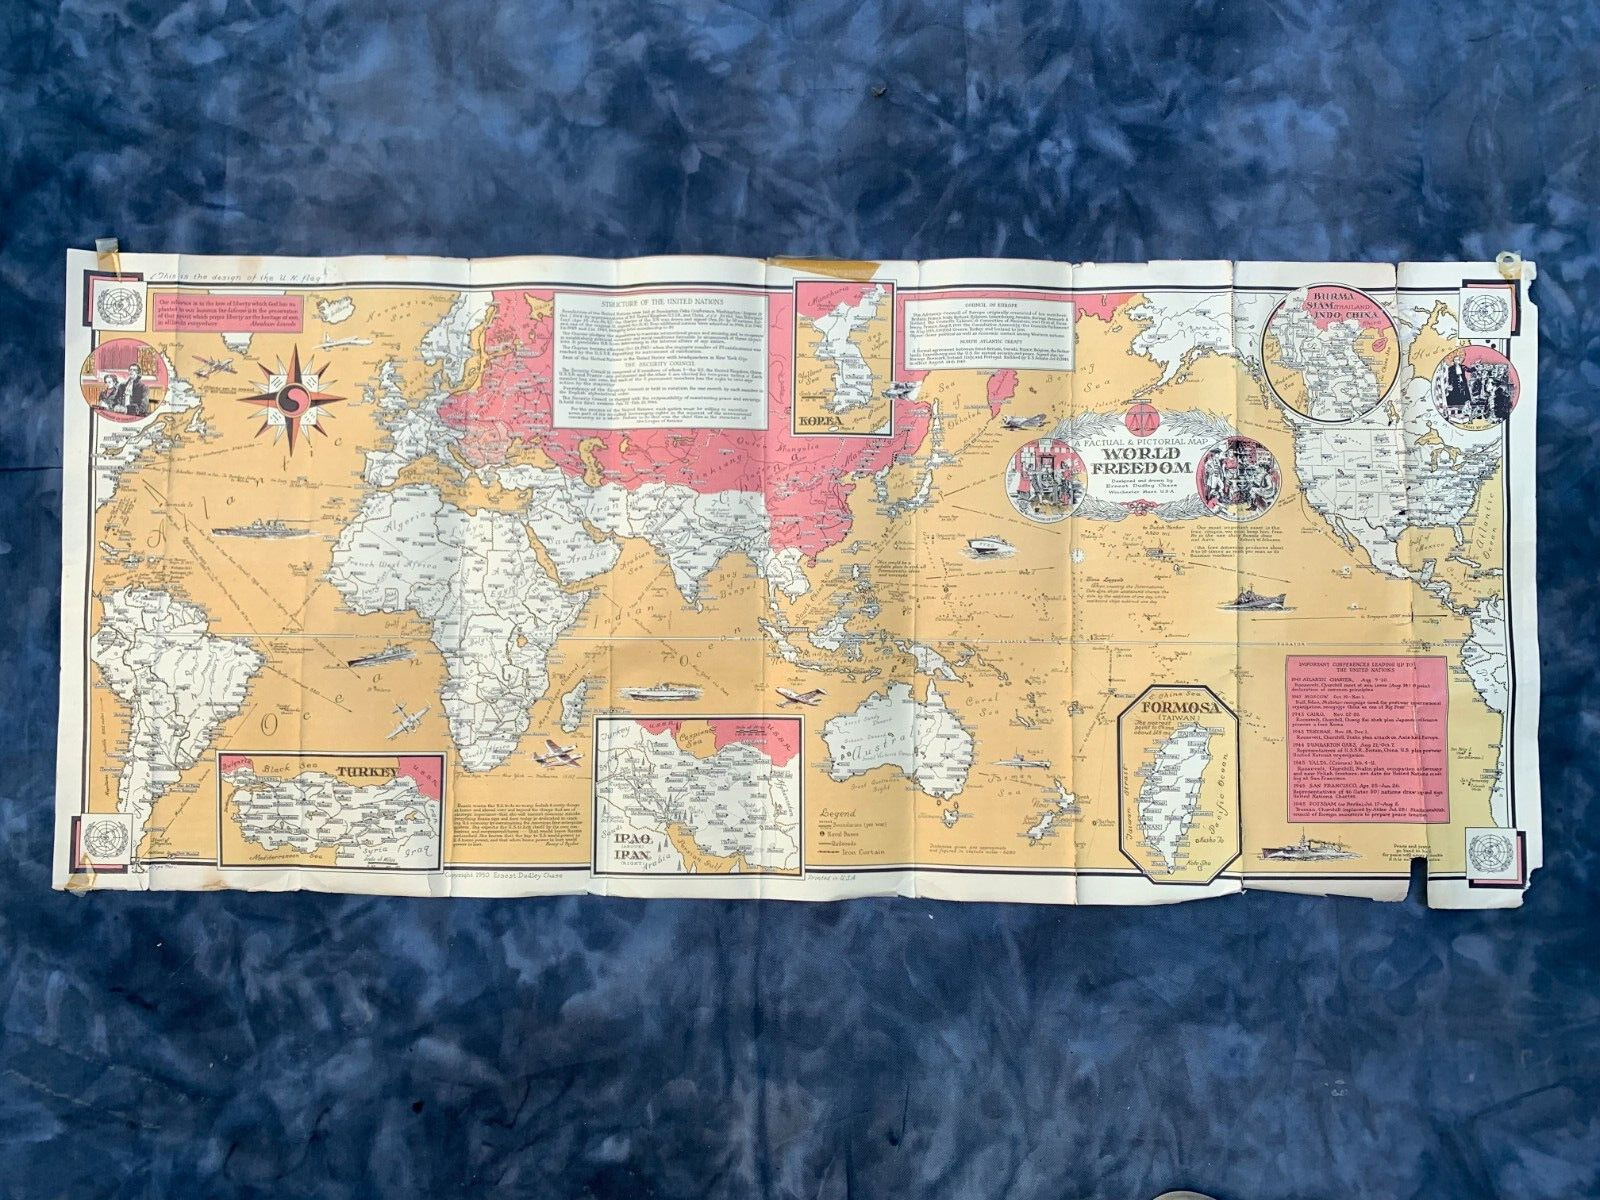 Vintage 1950 Pictorial Map World Freedom Ernest Chase Commemorate United Nations